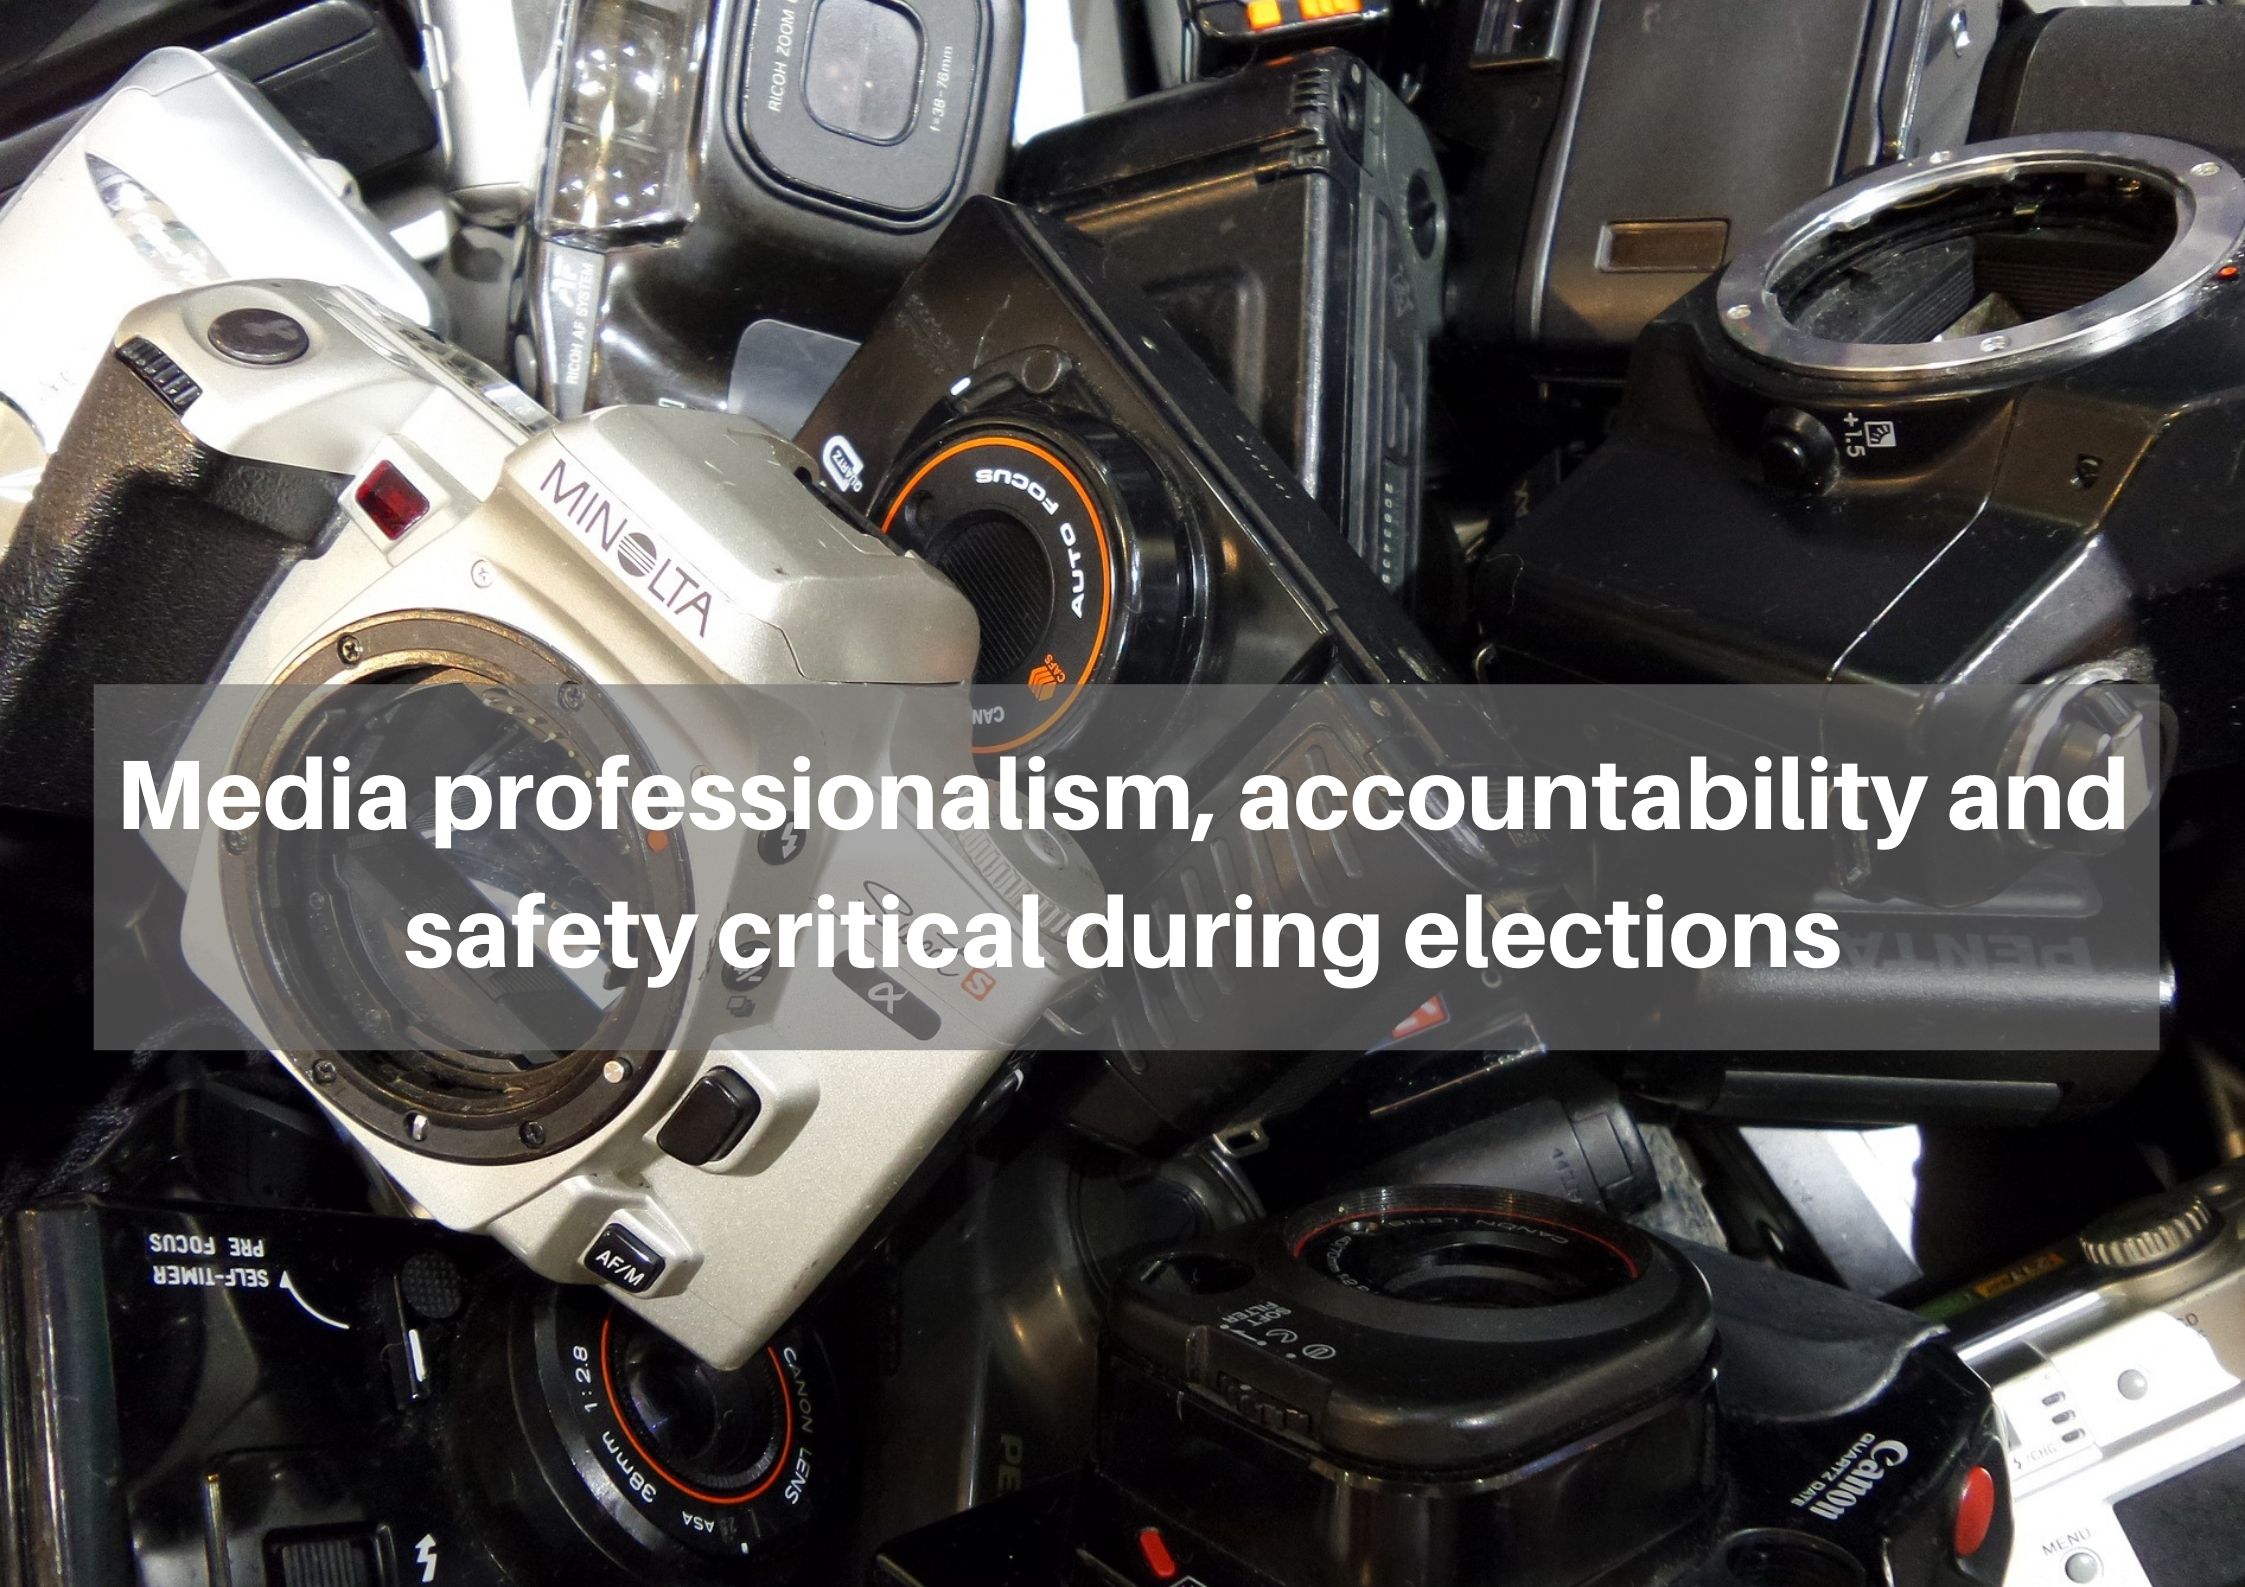 Media professionalism, accountability and safety critical during elections